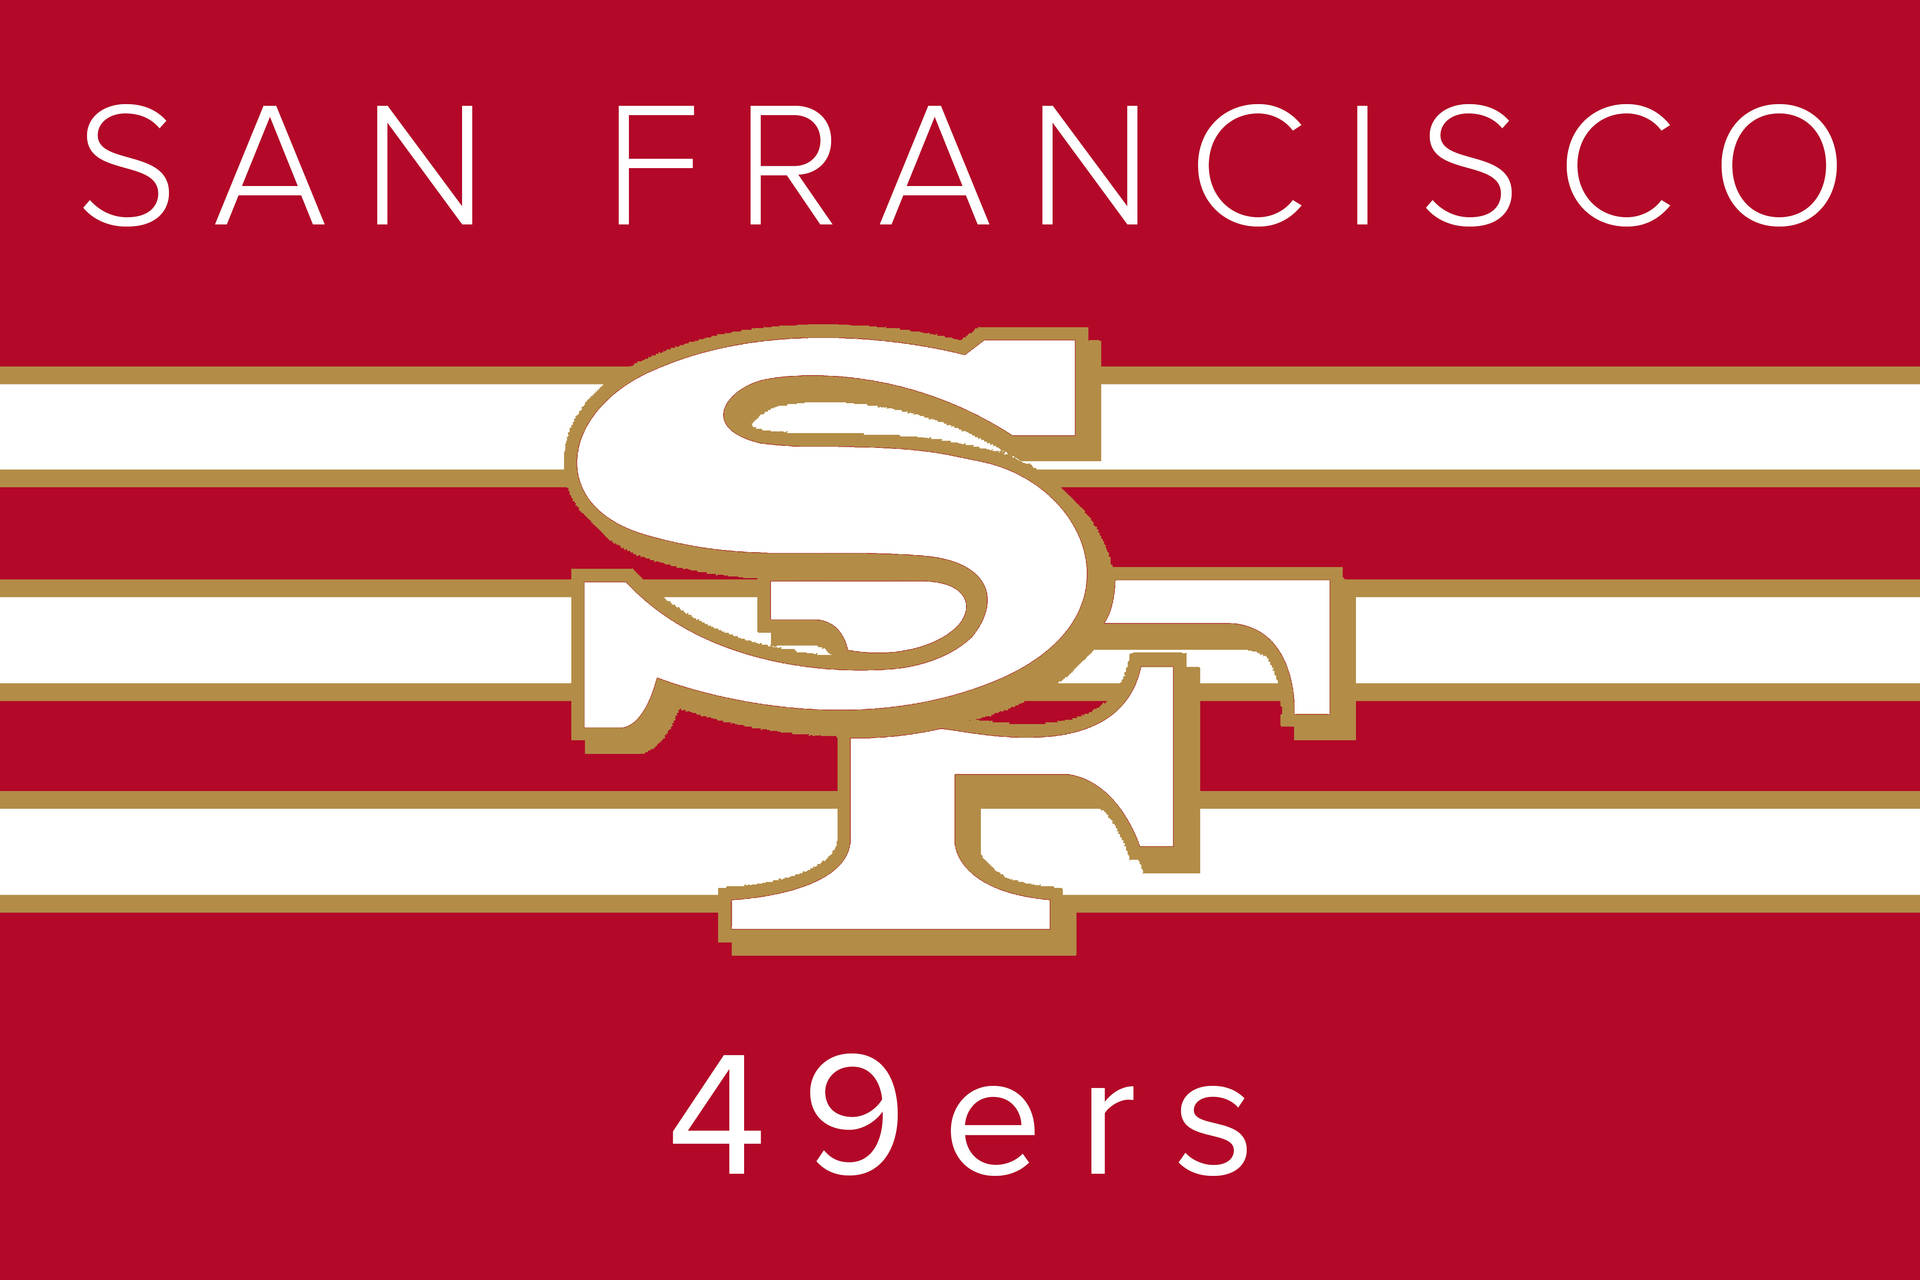 The San Francisco 49ers In Action